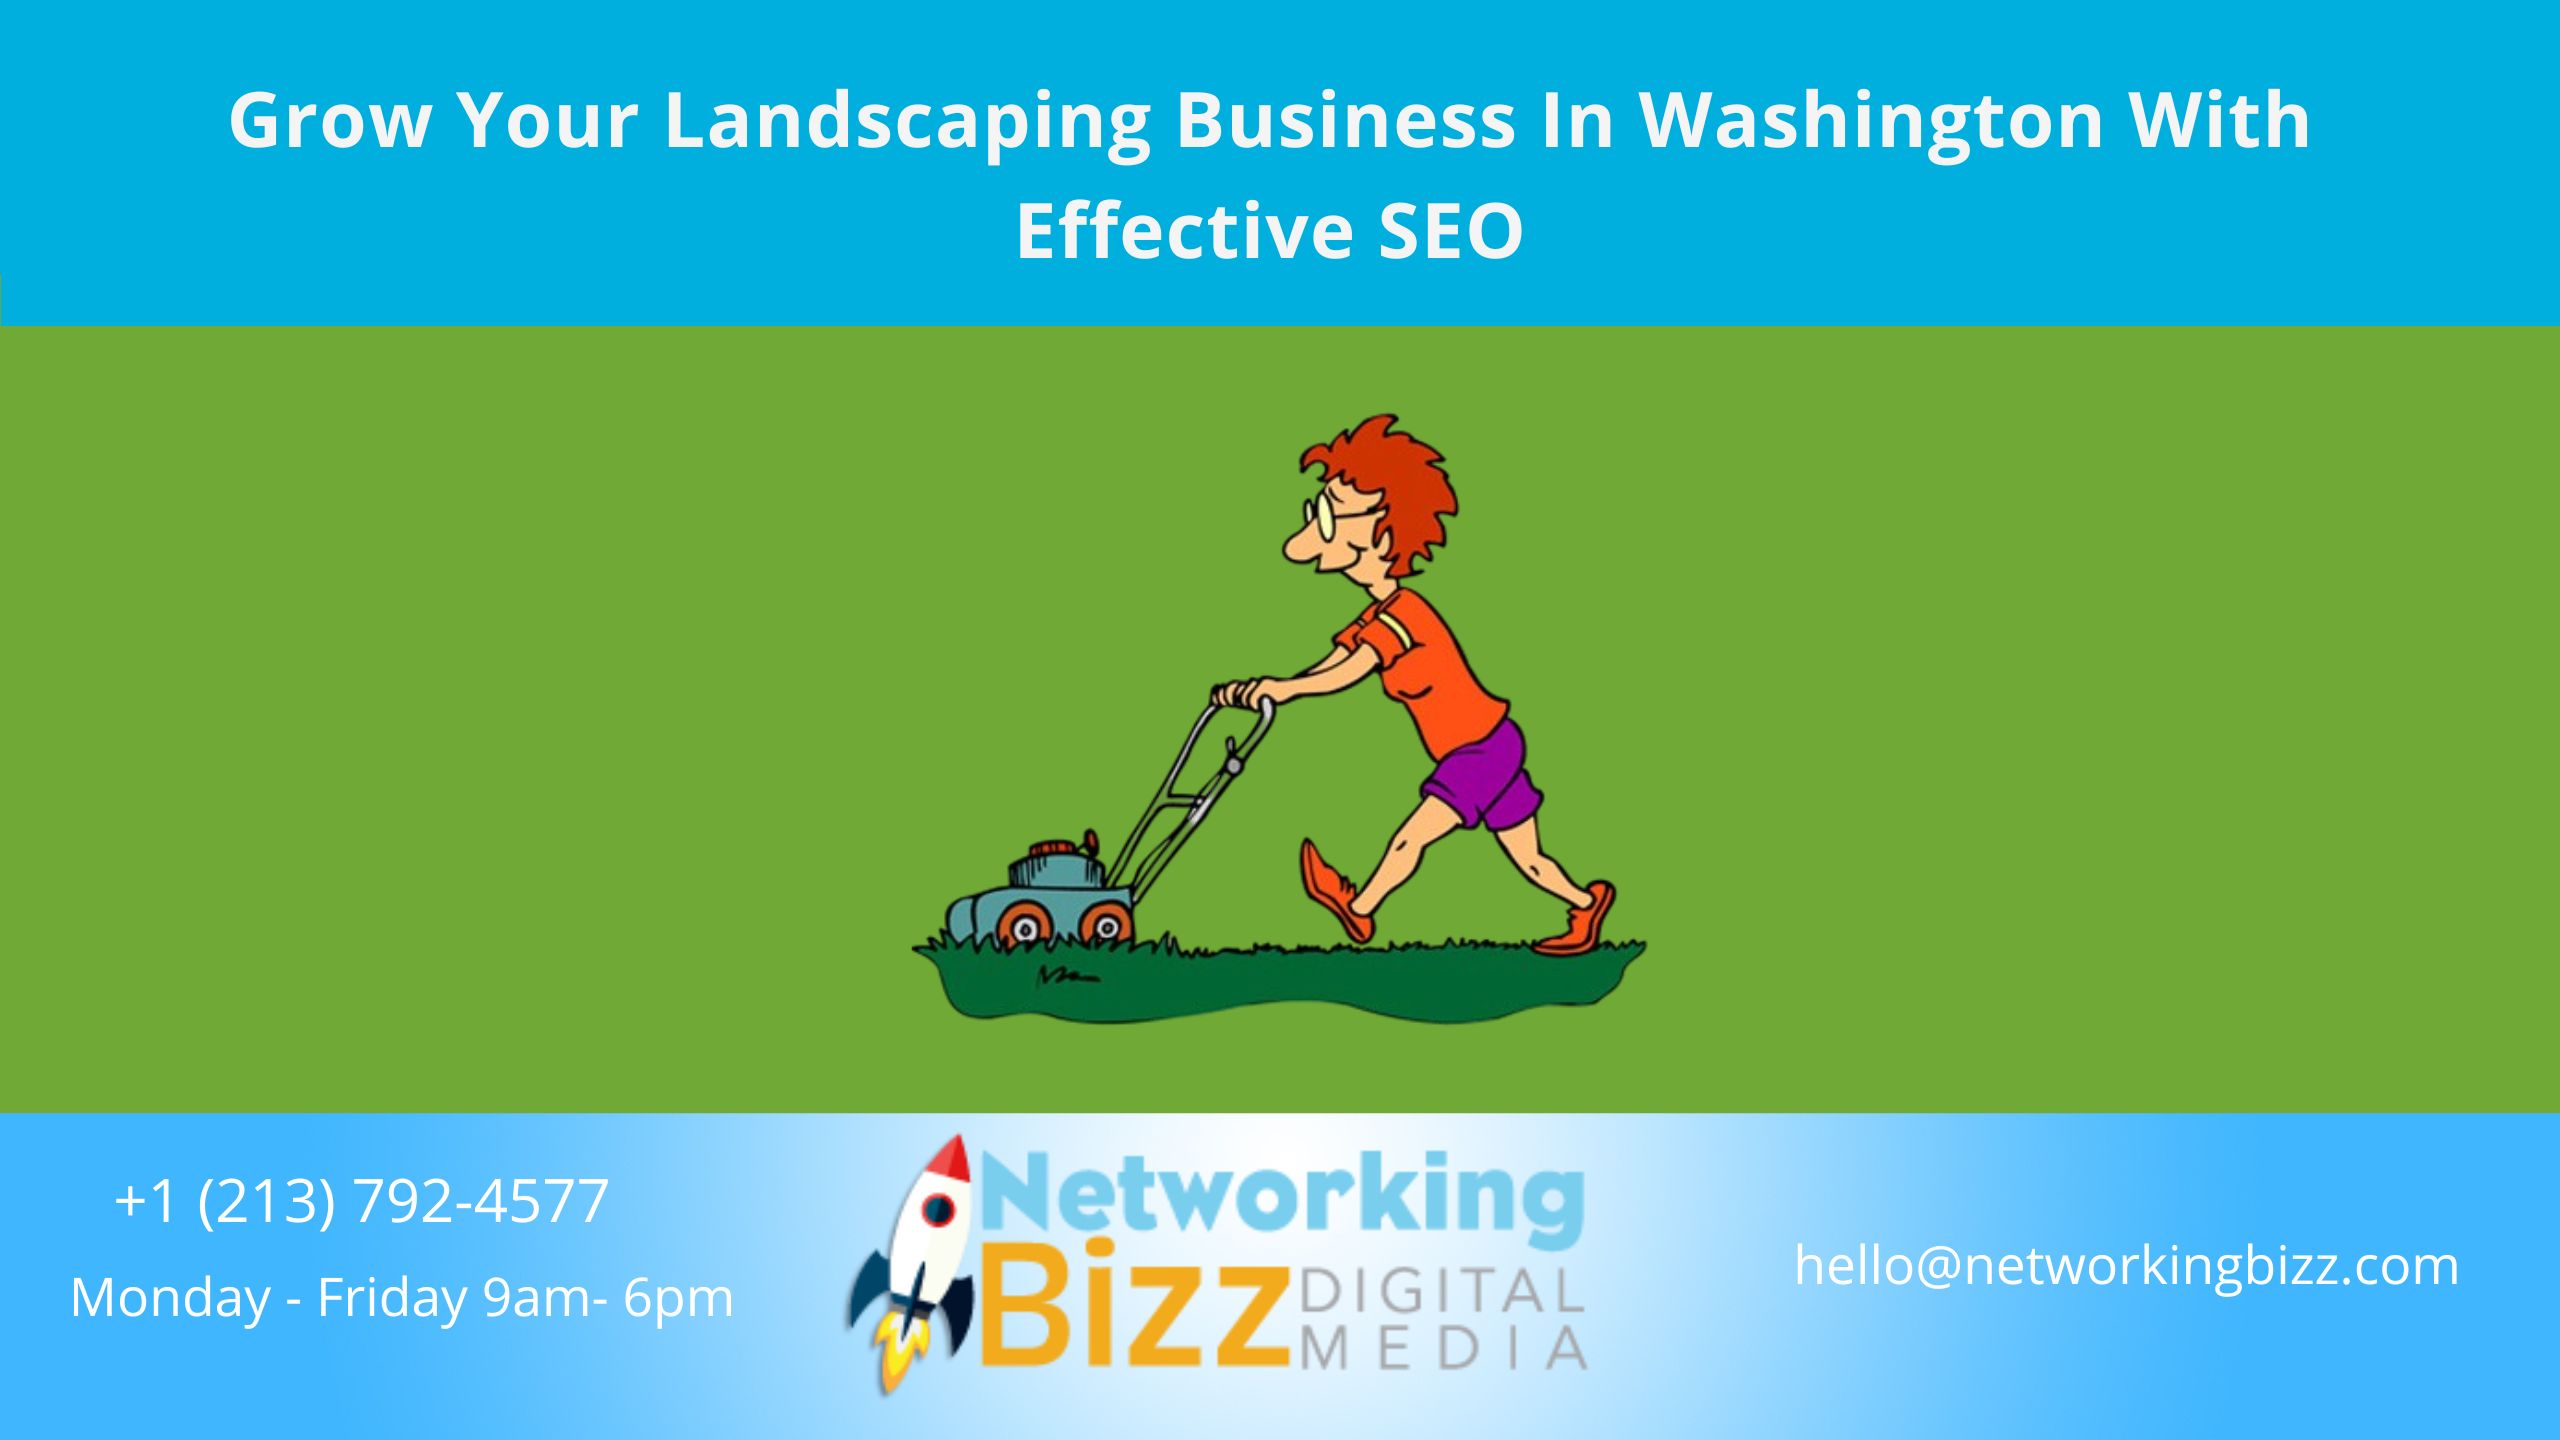 Grow Your Landscaping Business In Washington With Effective SEO